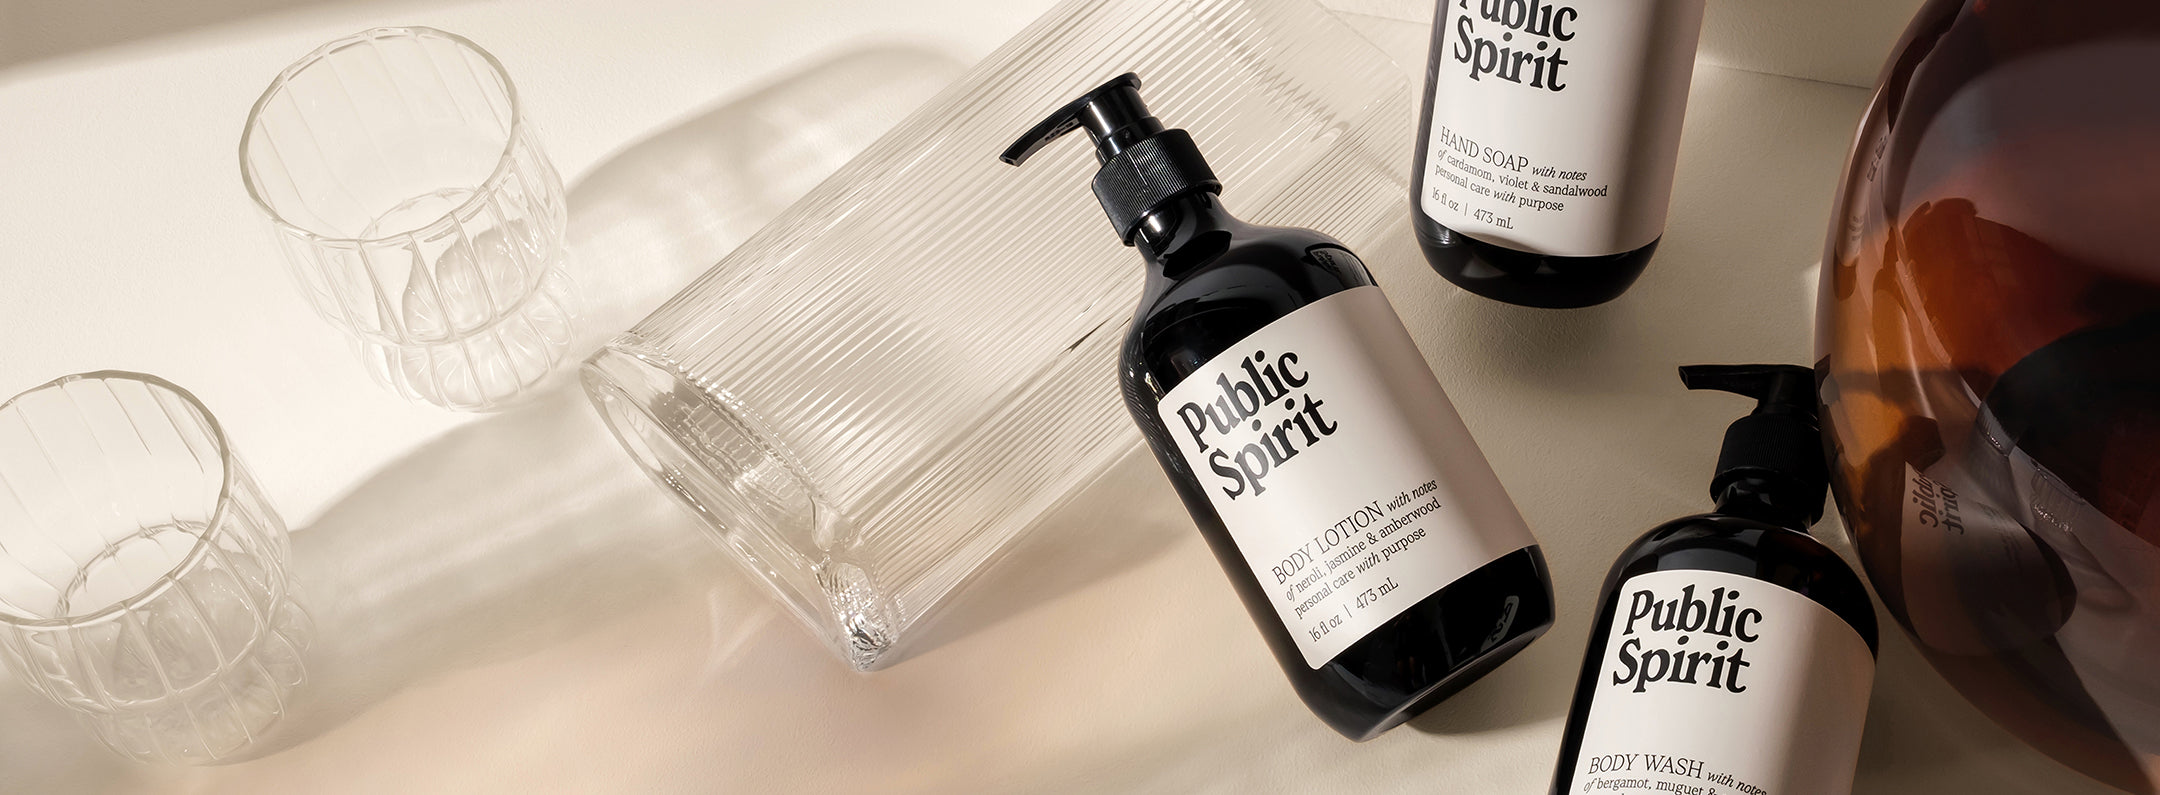 Public Spirit Hand Soap, Body Wash and Body Lotion scattered around